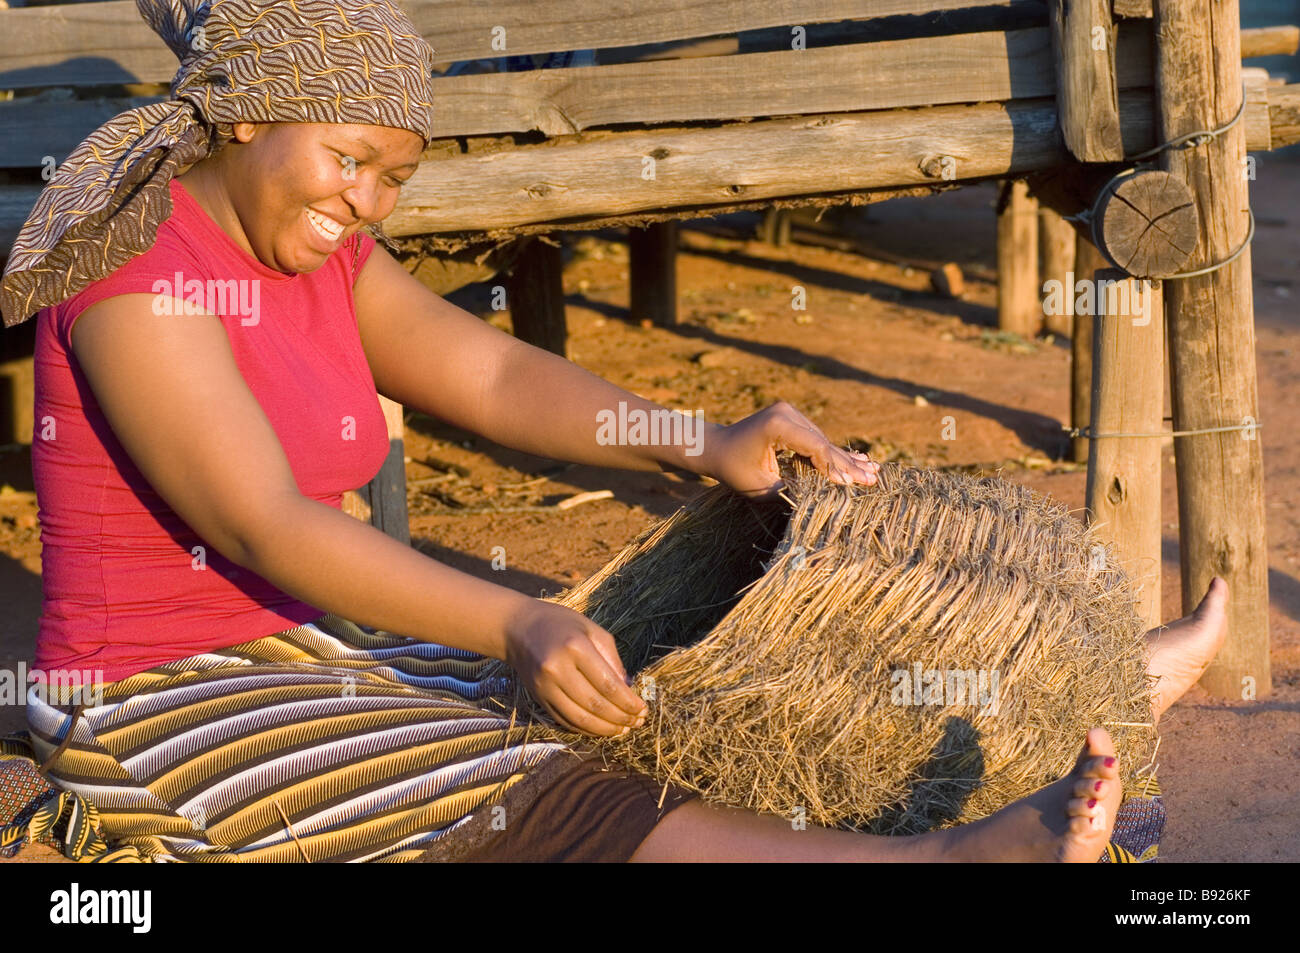 A smiling Swazi woman working on making a basket while sitting in the sun Swaziland Stock Photo